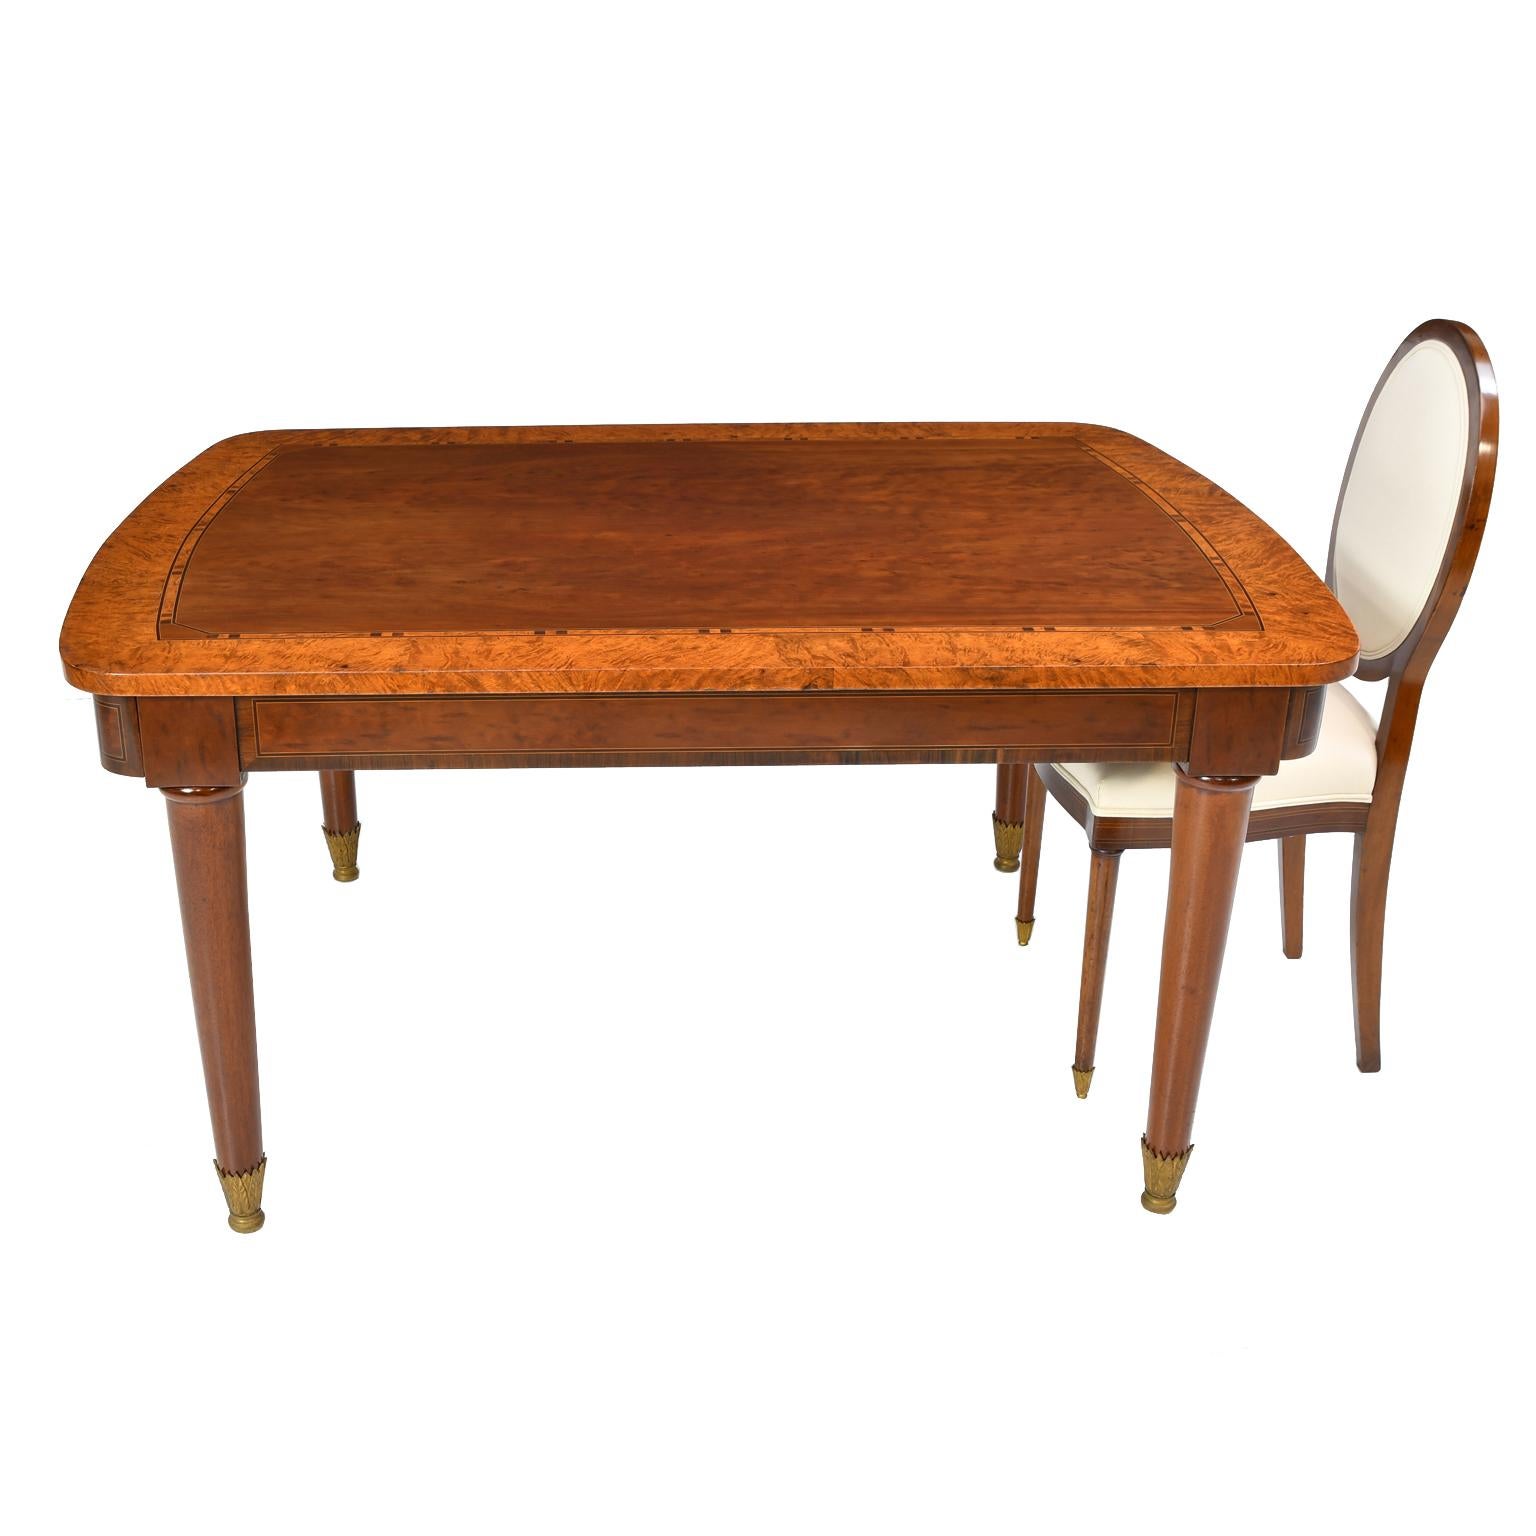 Polished Rectangular Art Deco Dining Table in Various Woods with Original Set of 6 Chairs